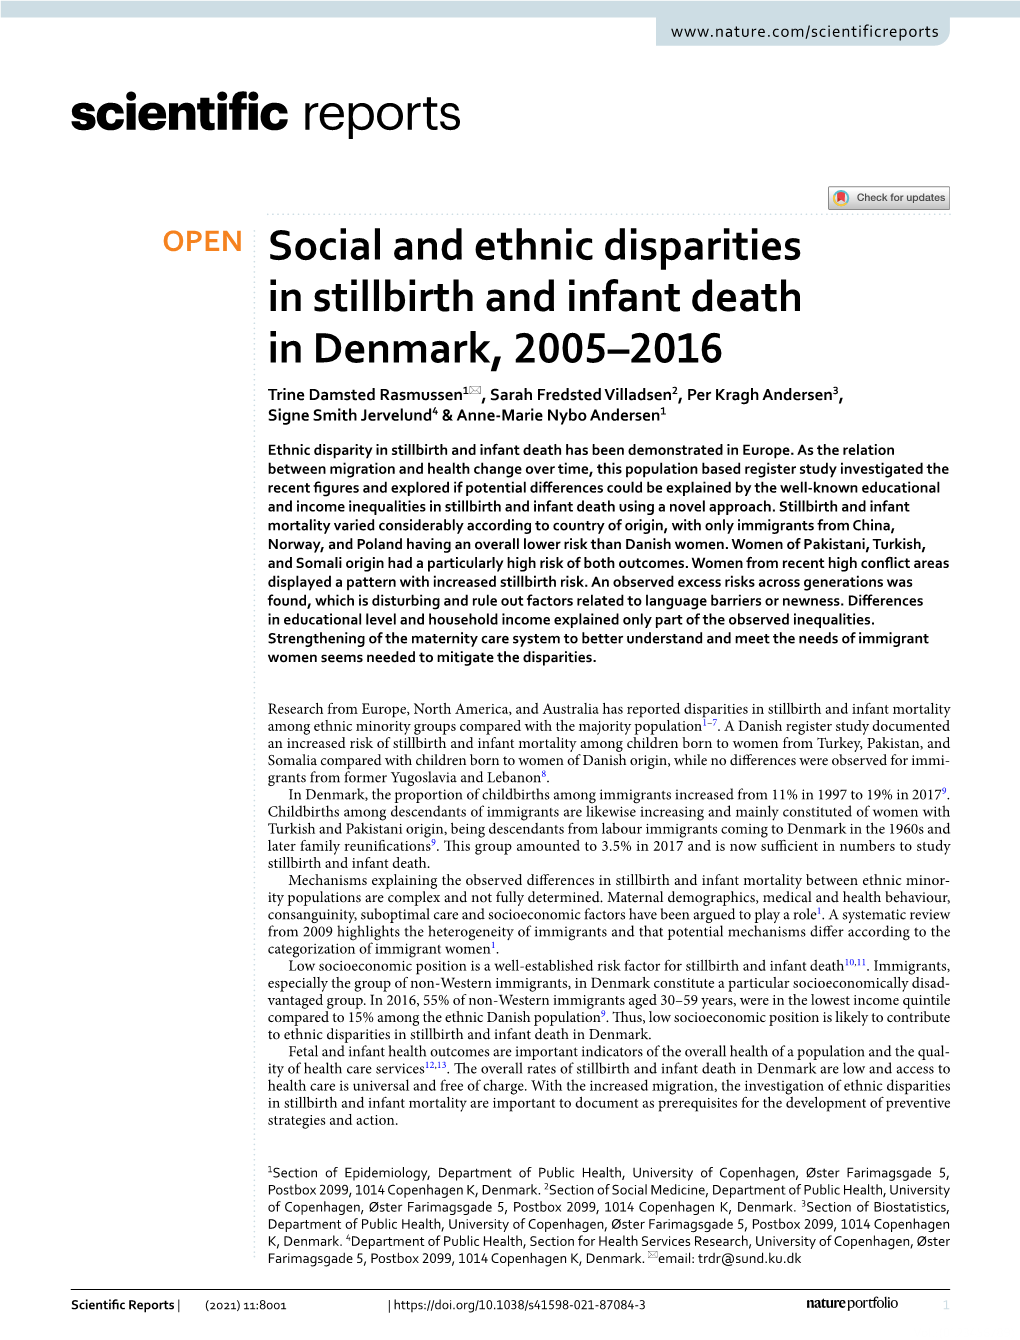 Social and Ethnic Disparities in Stillbirth and Infant Death In